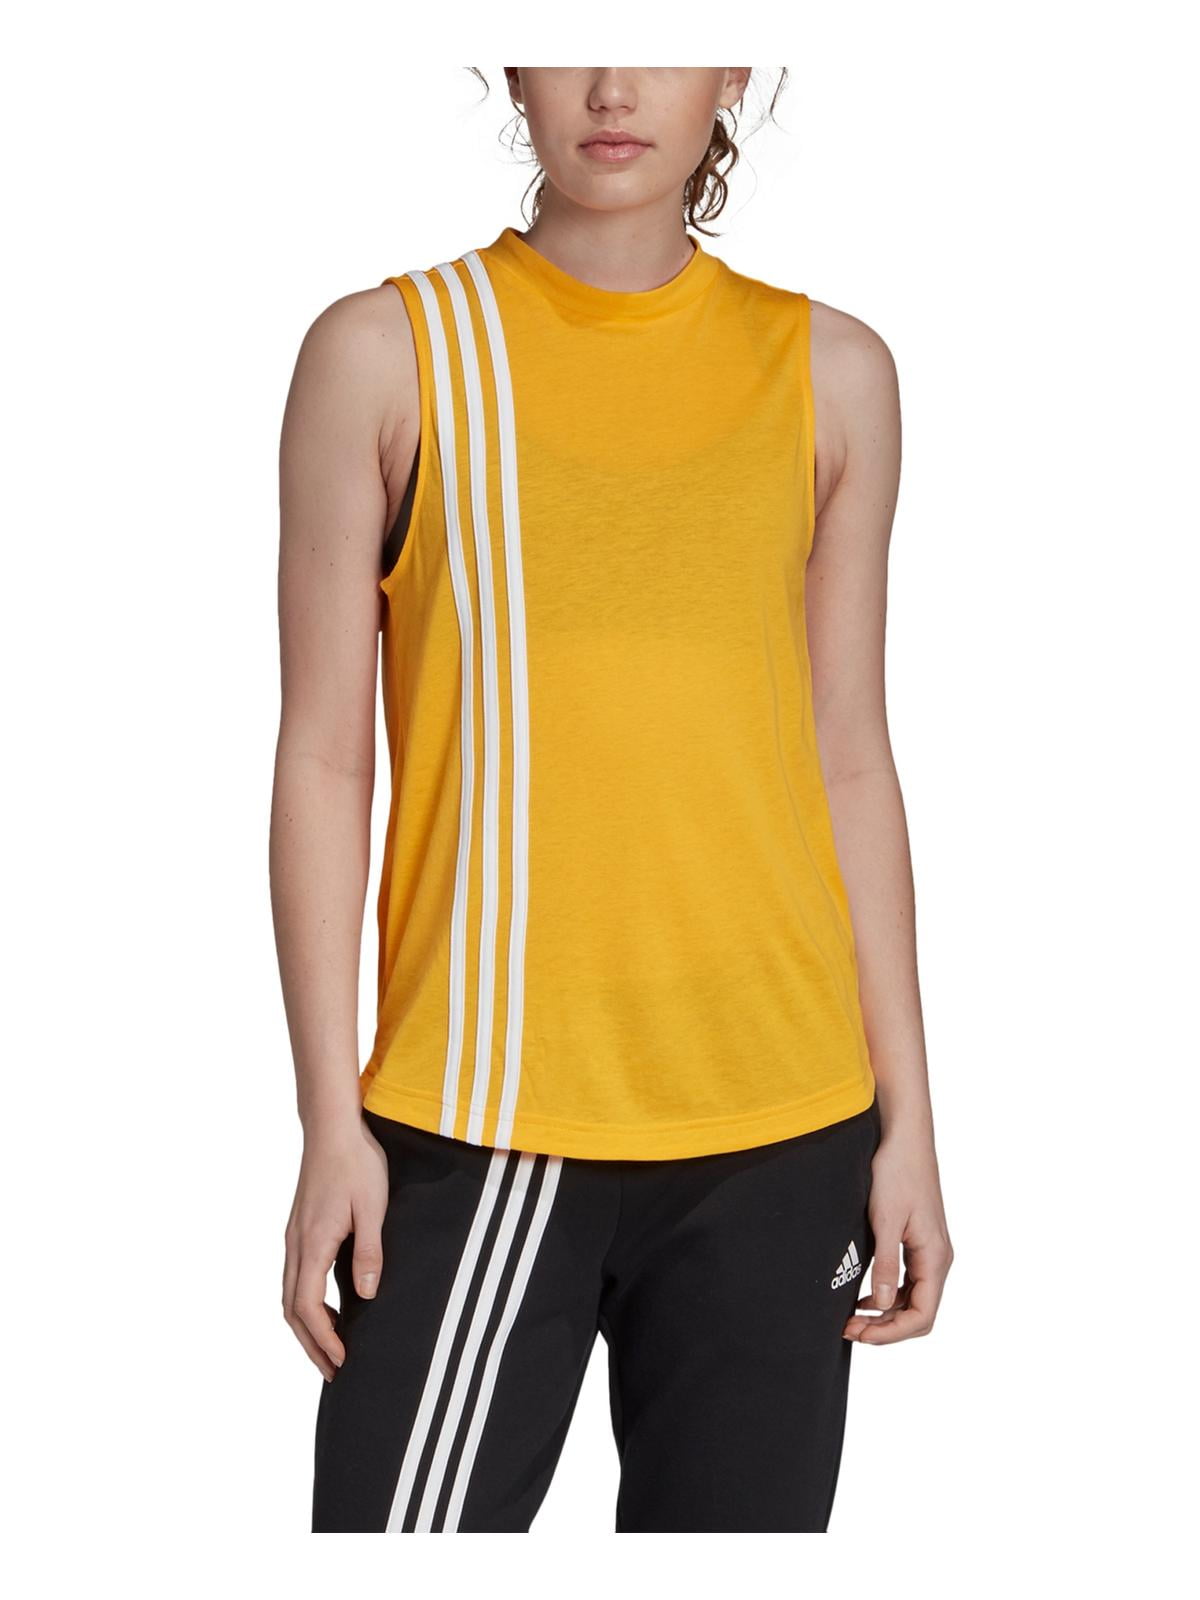 5 Day Adidas Workout Tank for Gym